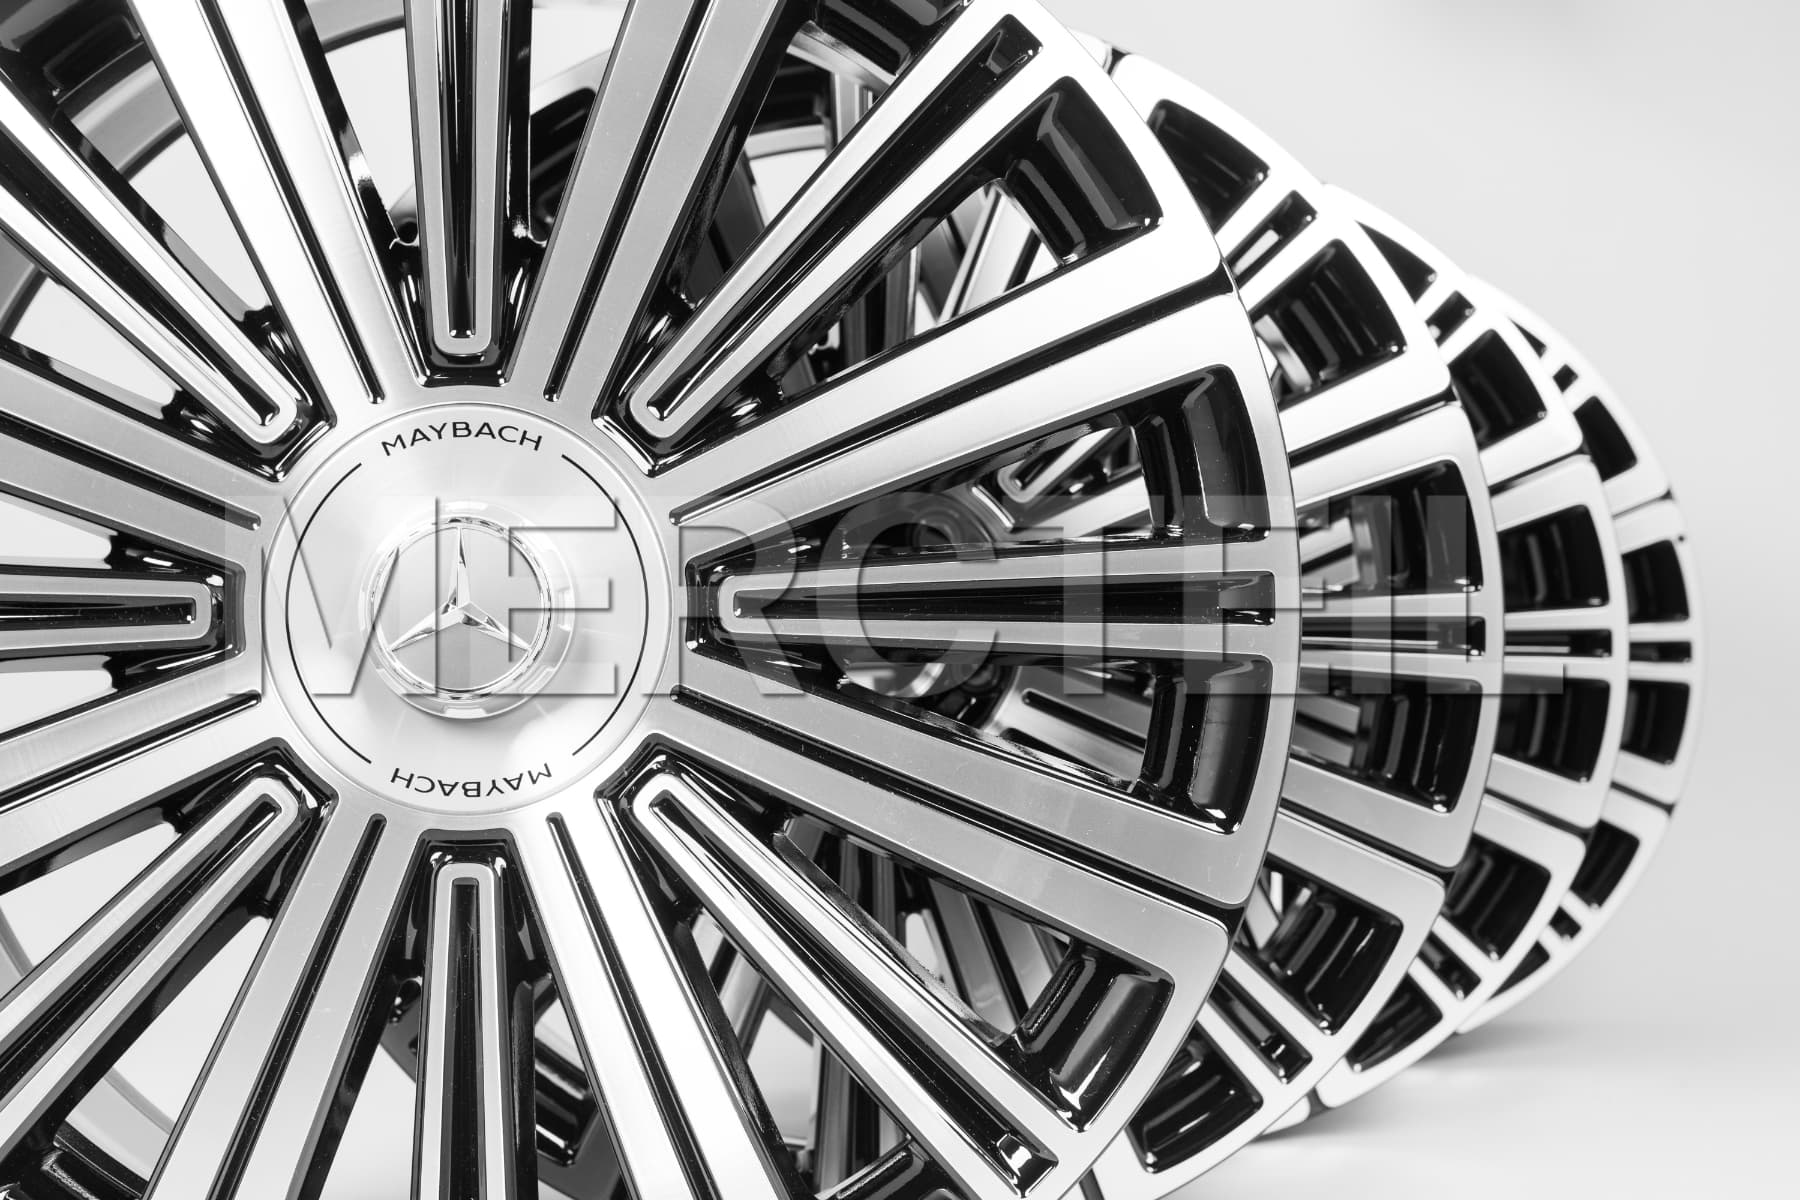 Maybach GLS Class Multi Spoke Alloy Wheels 22 Inch X167 Genuine Mercedes Benz (part number: A16740114007X23)